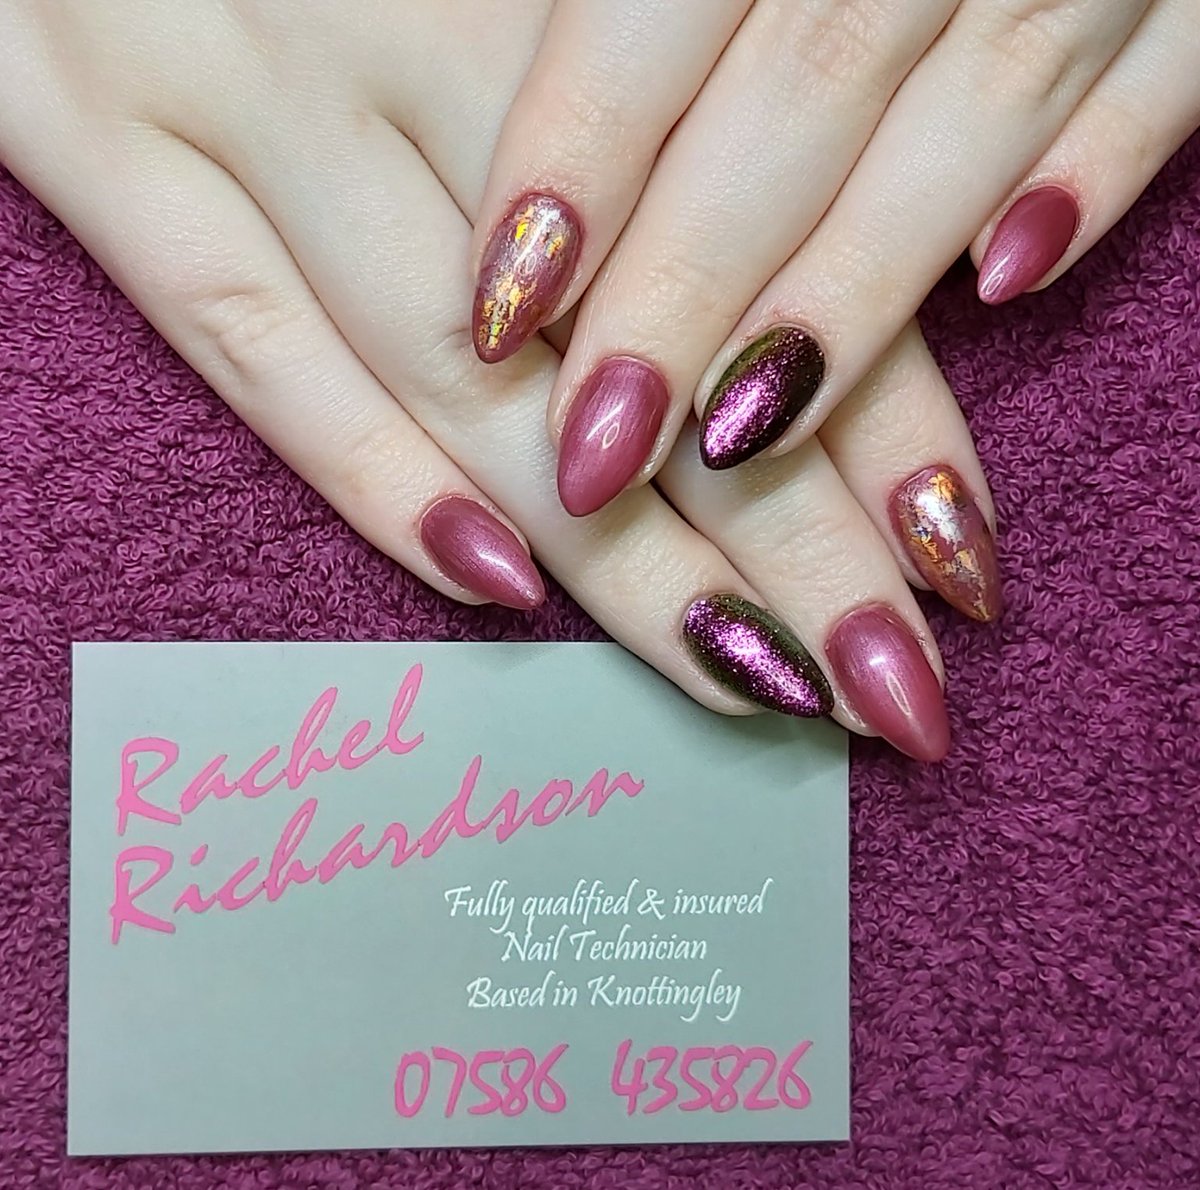 Acrylic extensions with Bio Sculpture's Mercury & Evo in Edith.
Book your nail appointment now by contacting 07586 435826!
#AcrylicNails #PinkNails #NailArt #FoilNails #AlmondNails #OvalNails #Knottingley #Castleford #Sherburn #Ferrybridge #Pontefract #Leeds #York #Snaith #Goole